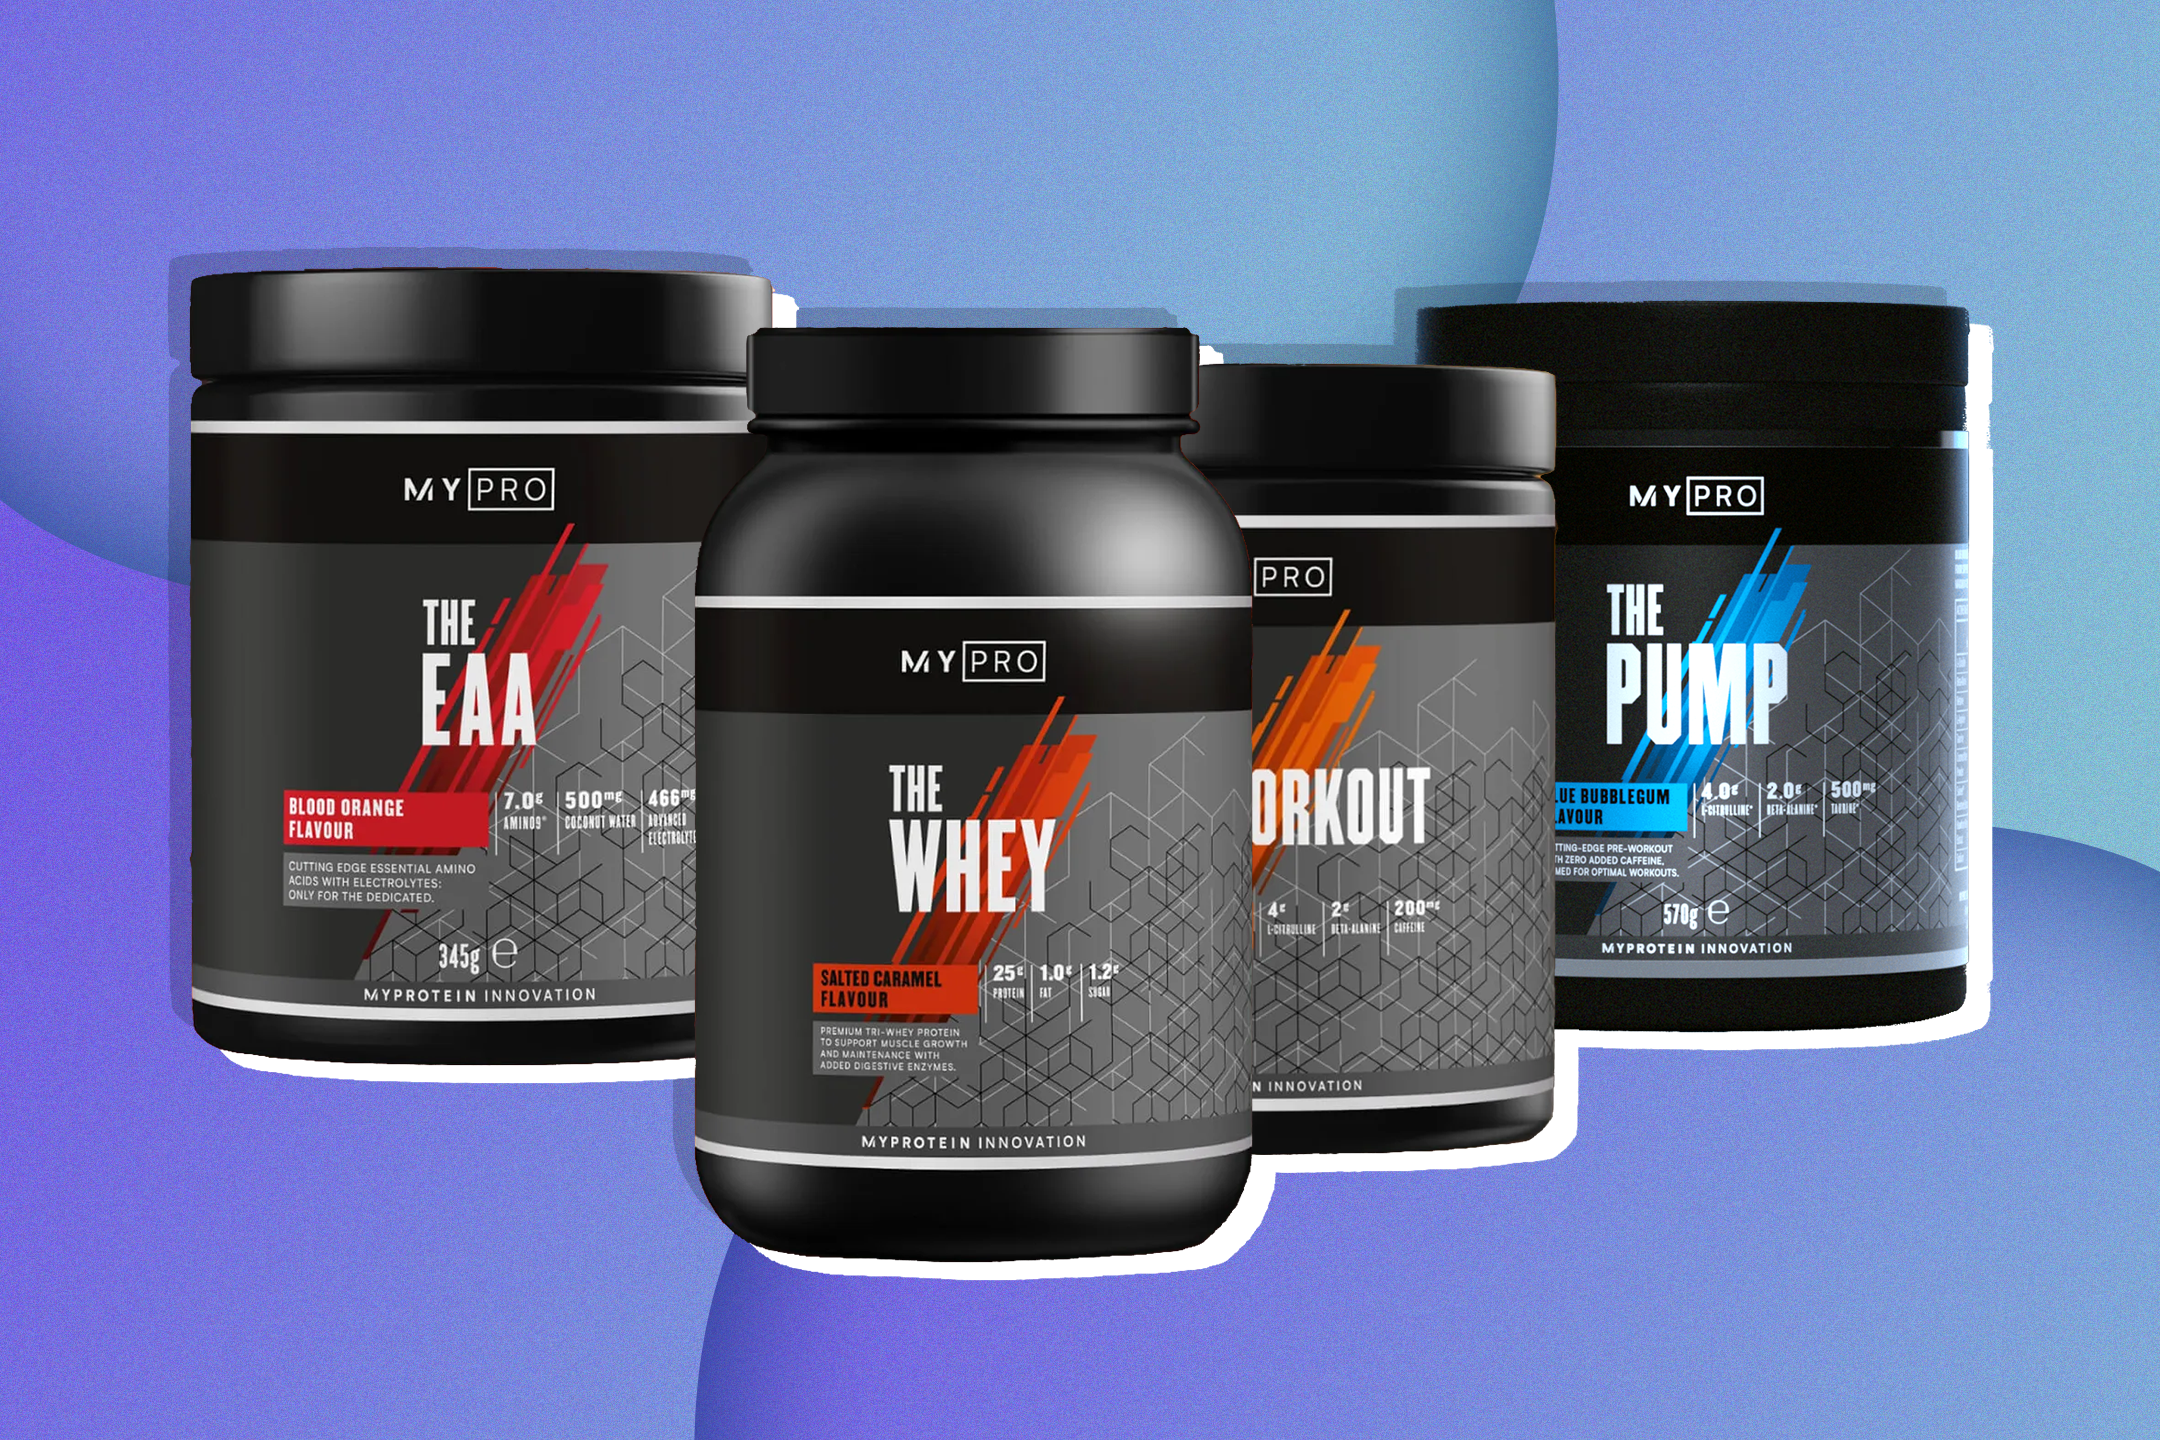 The MyPro range covers pre- and post-workout supplements, designed for those ready to kick their gym routines up to the next level